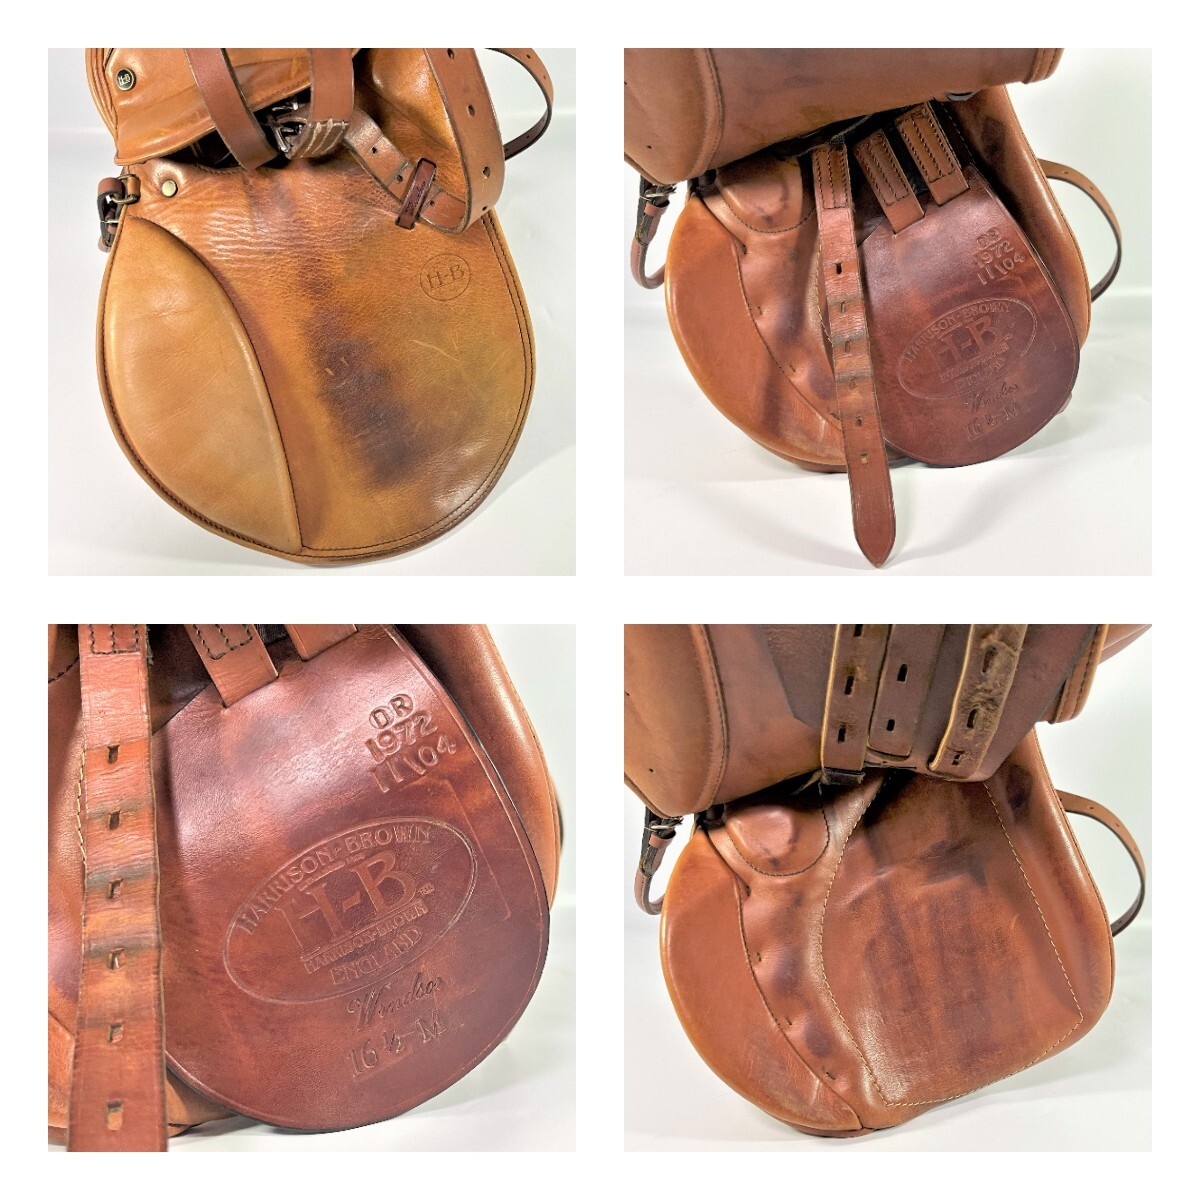 HARRISON BROWN is lison Brown FLECK made mchi16 1/2 M 16.5 -inch saddle synthesis saddle *R601124